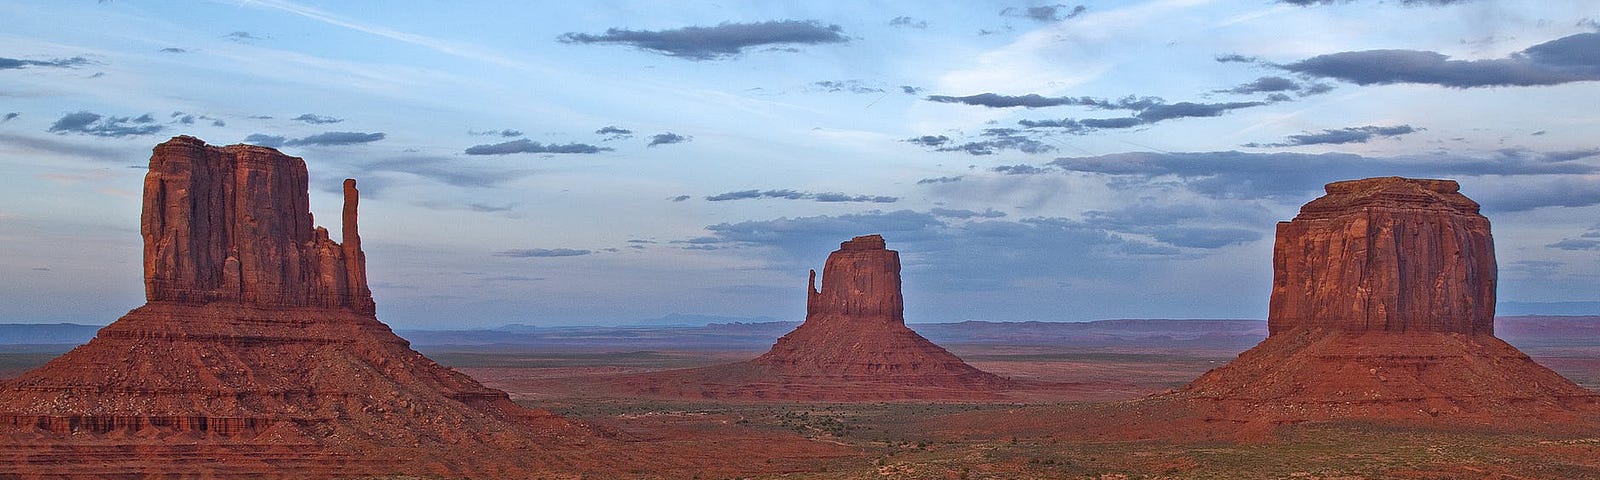 Landscape photograph of three distinctive rock formations. A cluster of vast sandstone buttes underneath a blue sky with clouds.